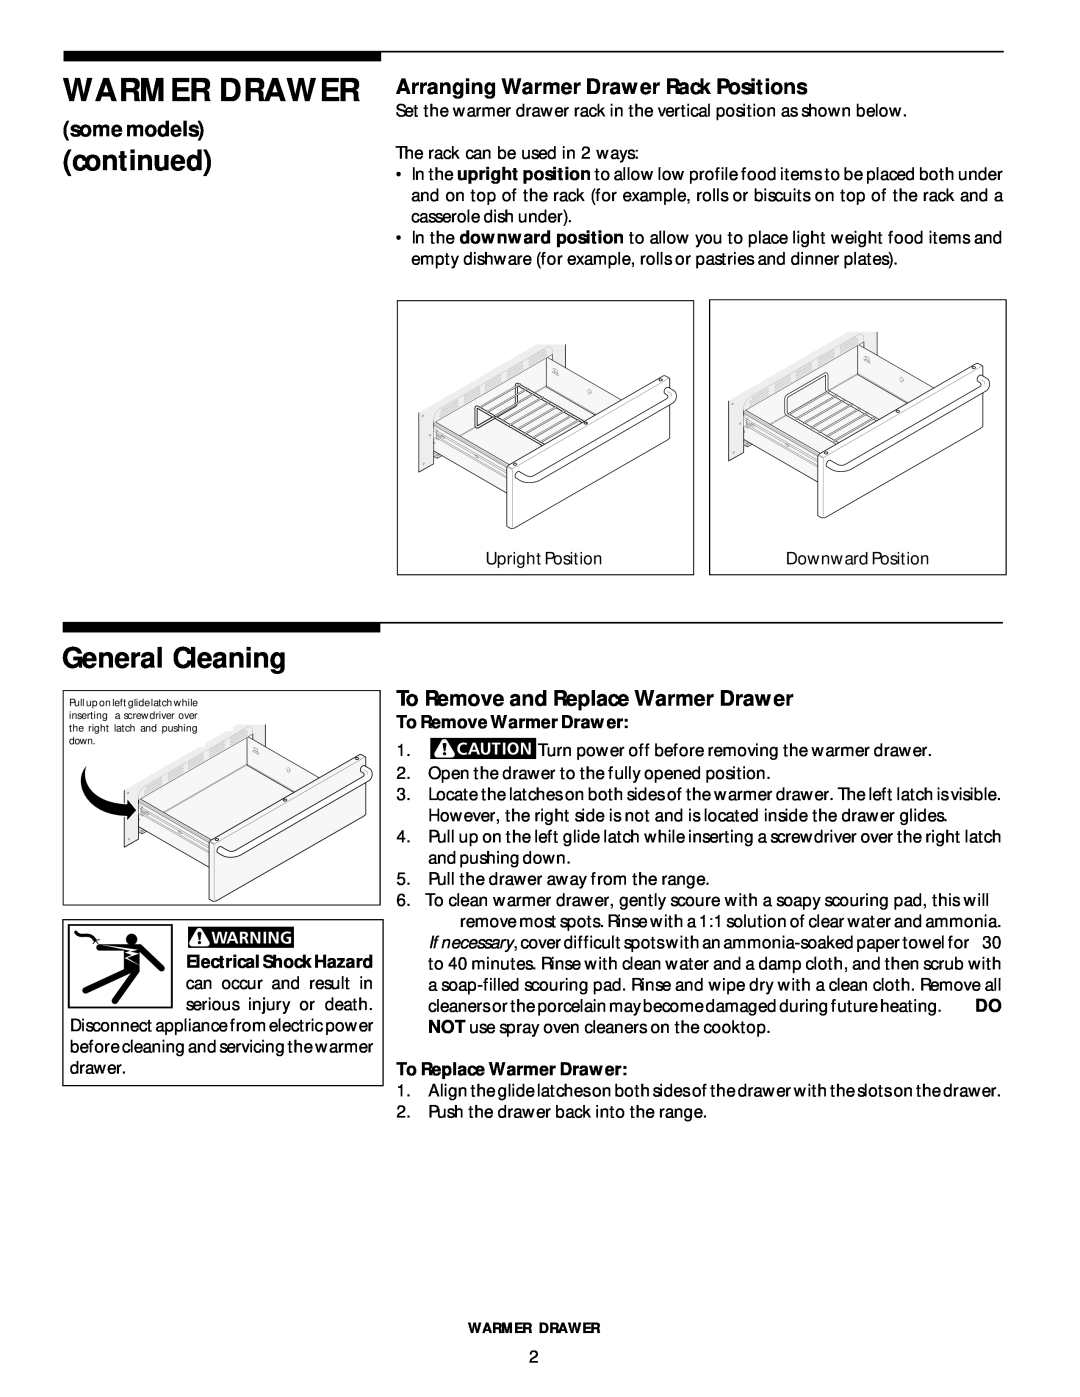 Frigidaire 318200404 manual continued, General Cleaning, some models, Arranging Warmer Drawer Rack Positions 